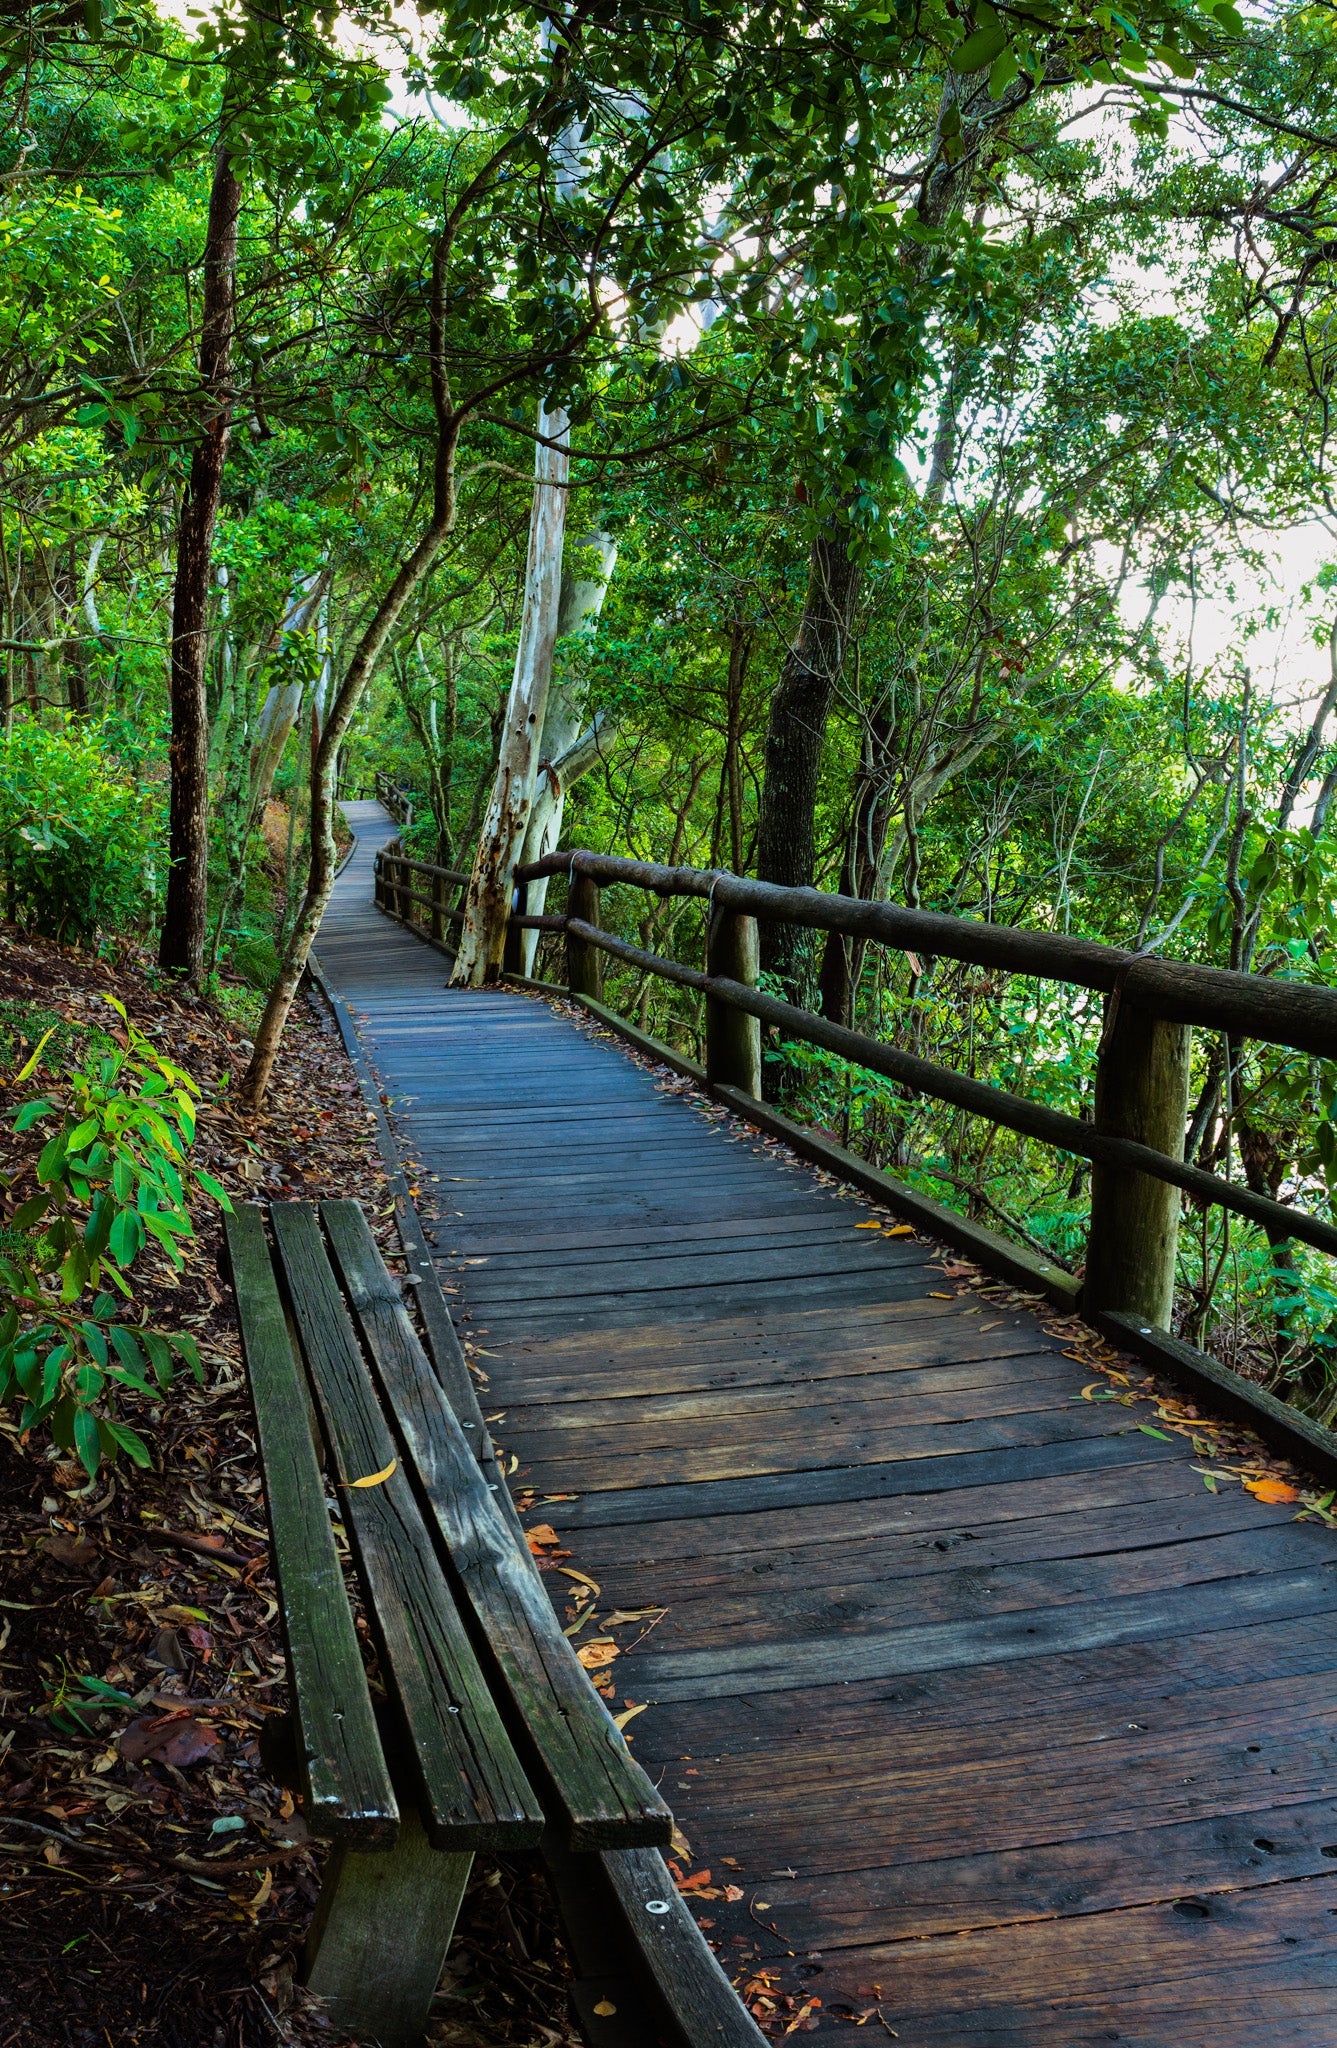 An image which captures the last day of the existence of the old walkway to Hellsgate at Noosa in Queensland, Australia.